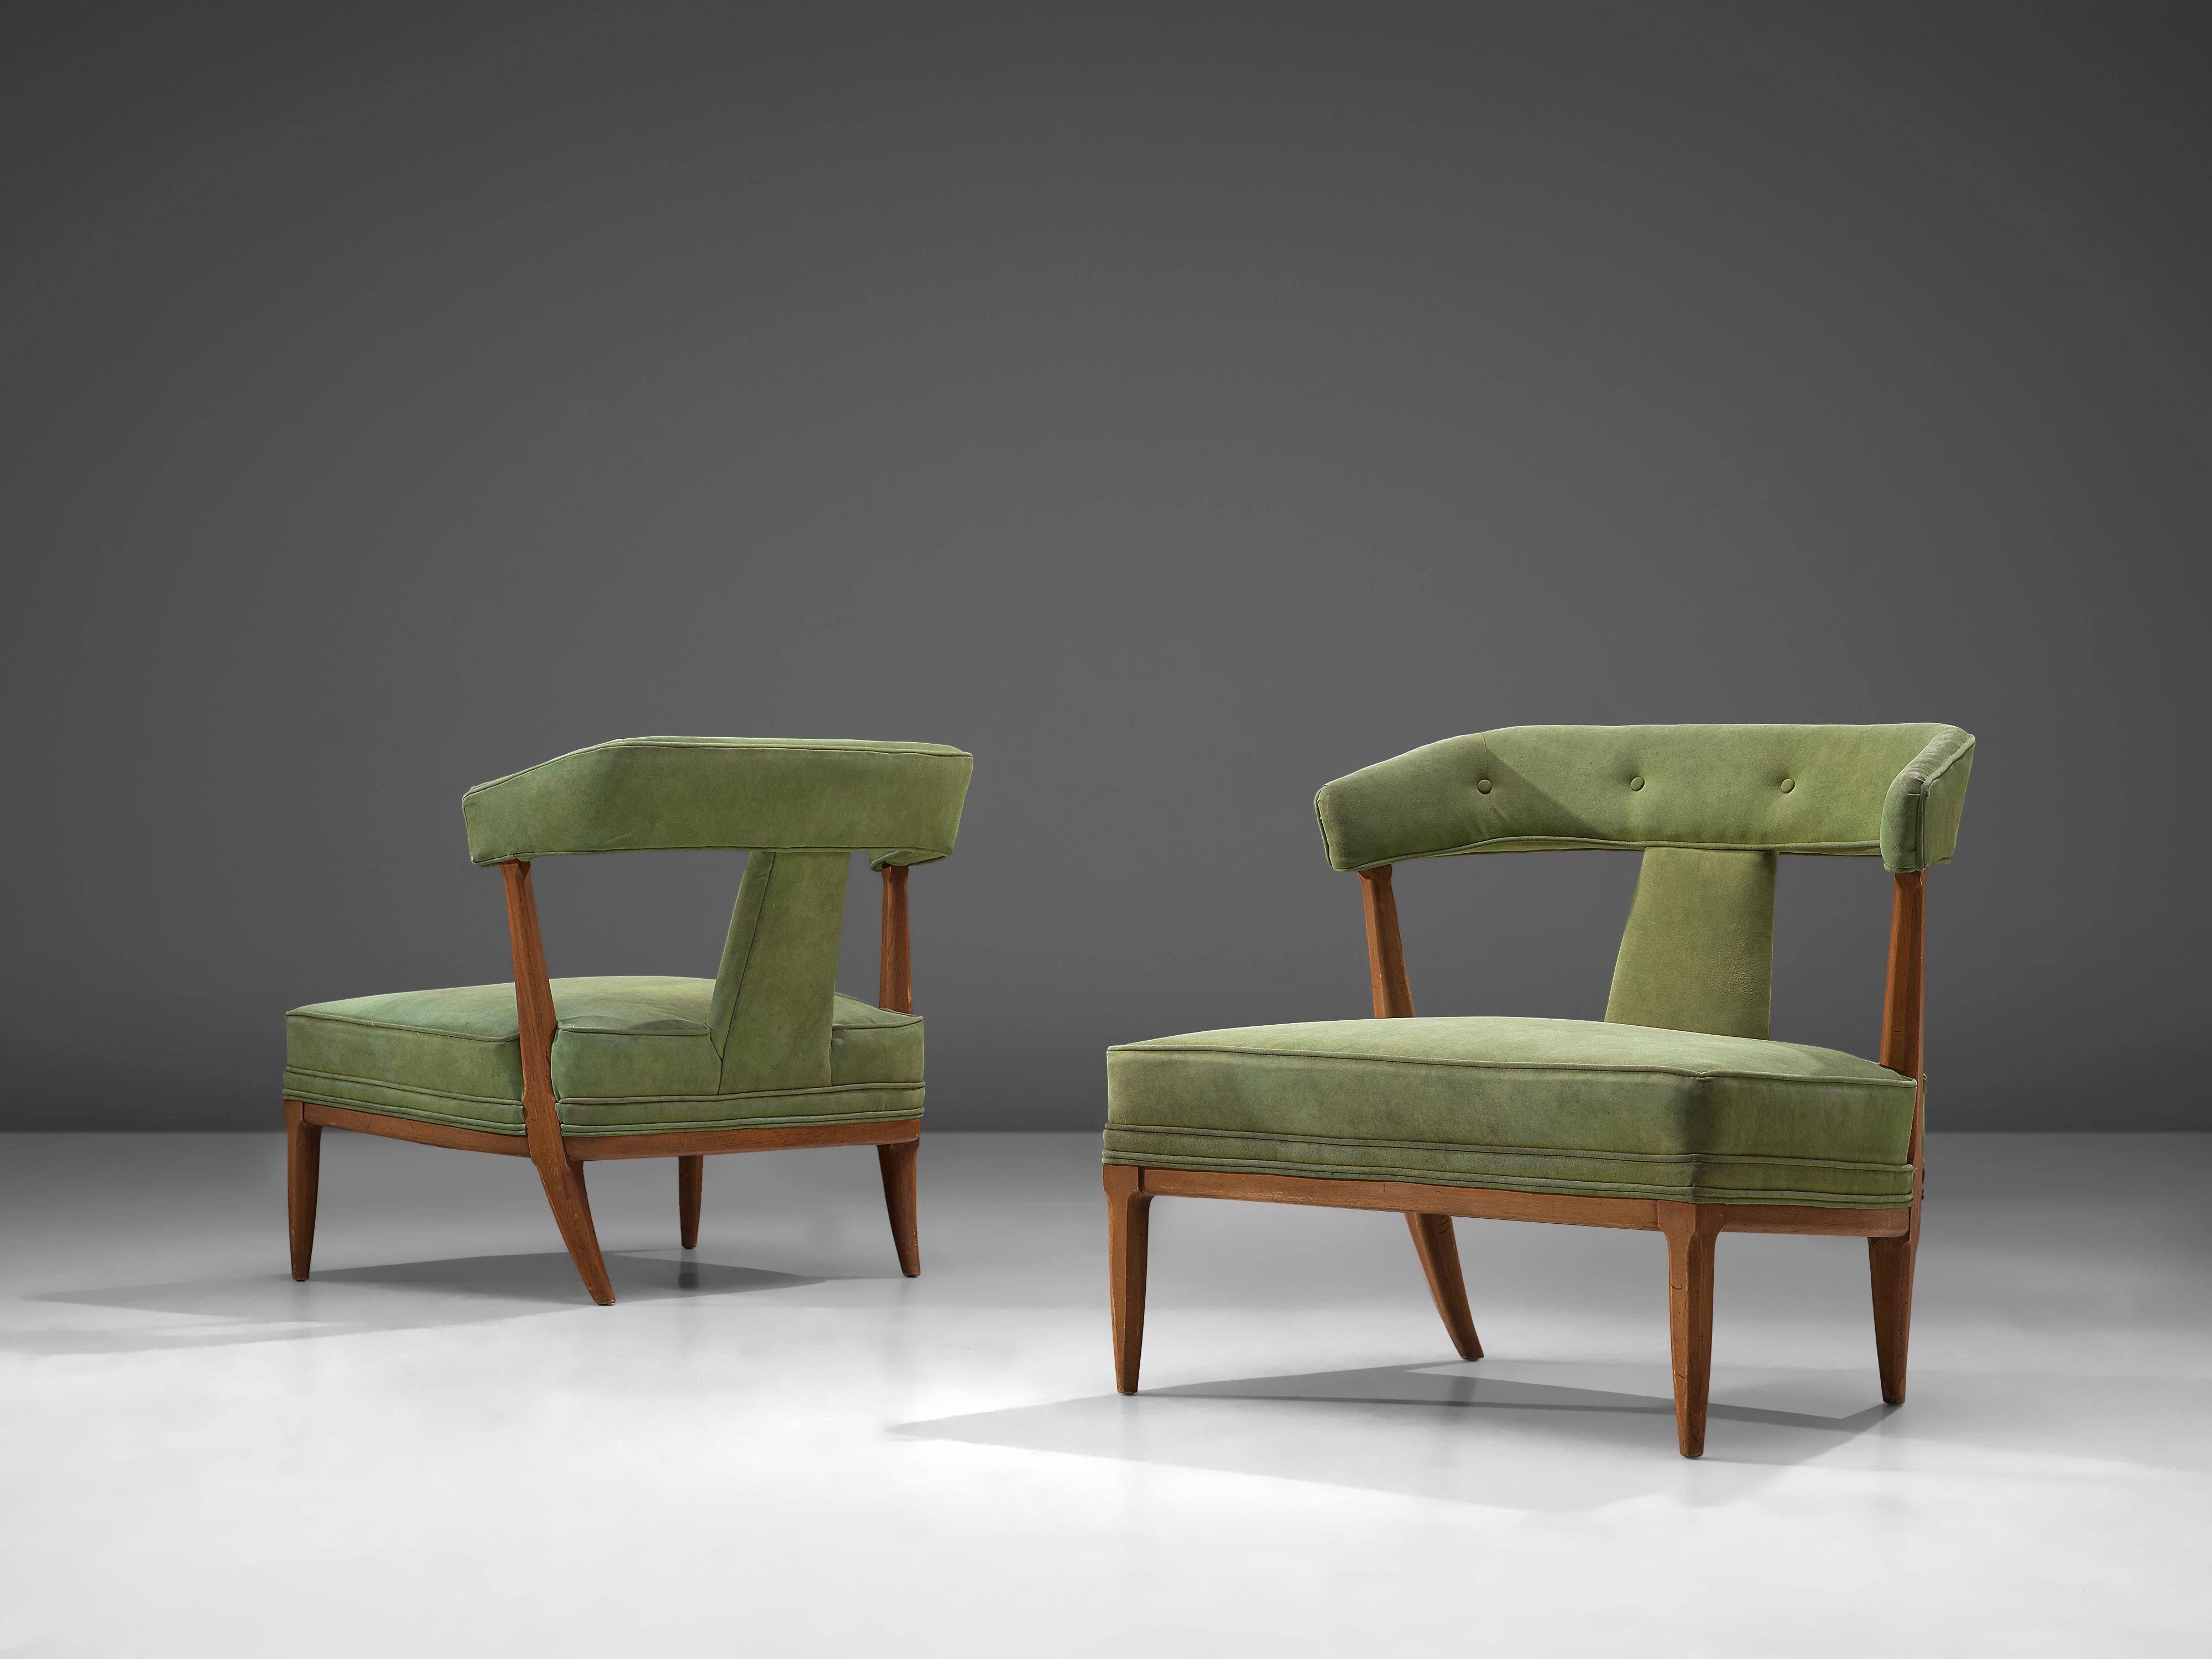 Pair of easy chairs, fabric, beech, American, 1950s from Tomlinson's 'Sophisticate' Collection by John Lubberts and Lambert Mulder.

This pair of American easy chairs are executed in darkened beech and green upholstery. The seat is thick and wide.